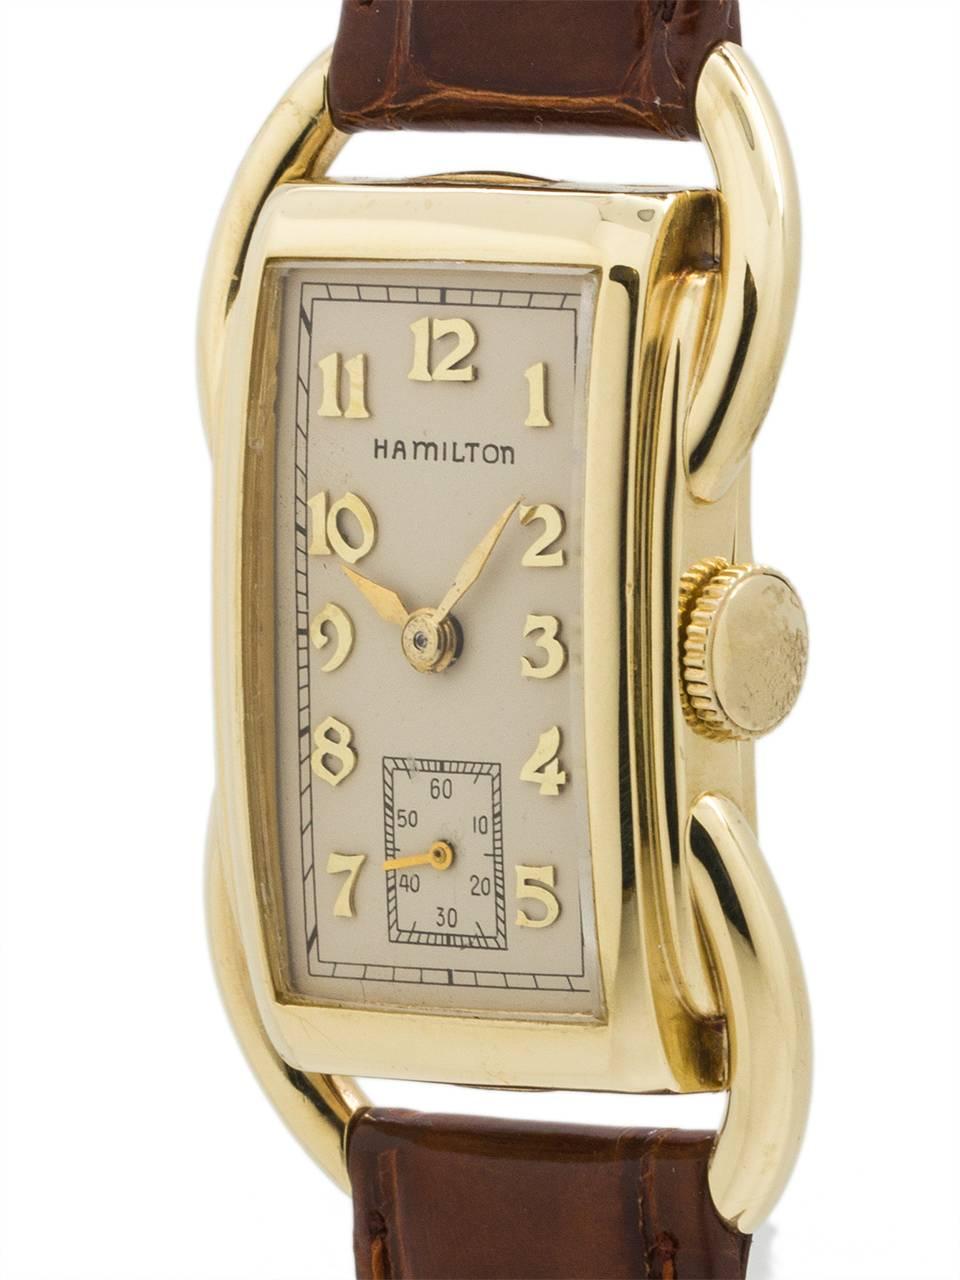 
Vintage man's Hamilton 14K YG “Bentley” model with personalized case back engraving dating this example to 1939. The Bentley is one of the most distinctive case designs of the early Hamilton models with prominent curved tubes on each side of the